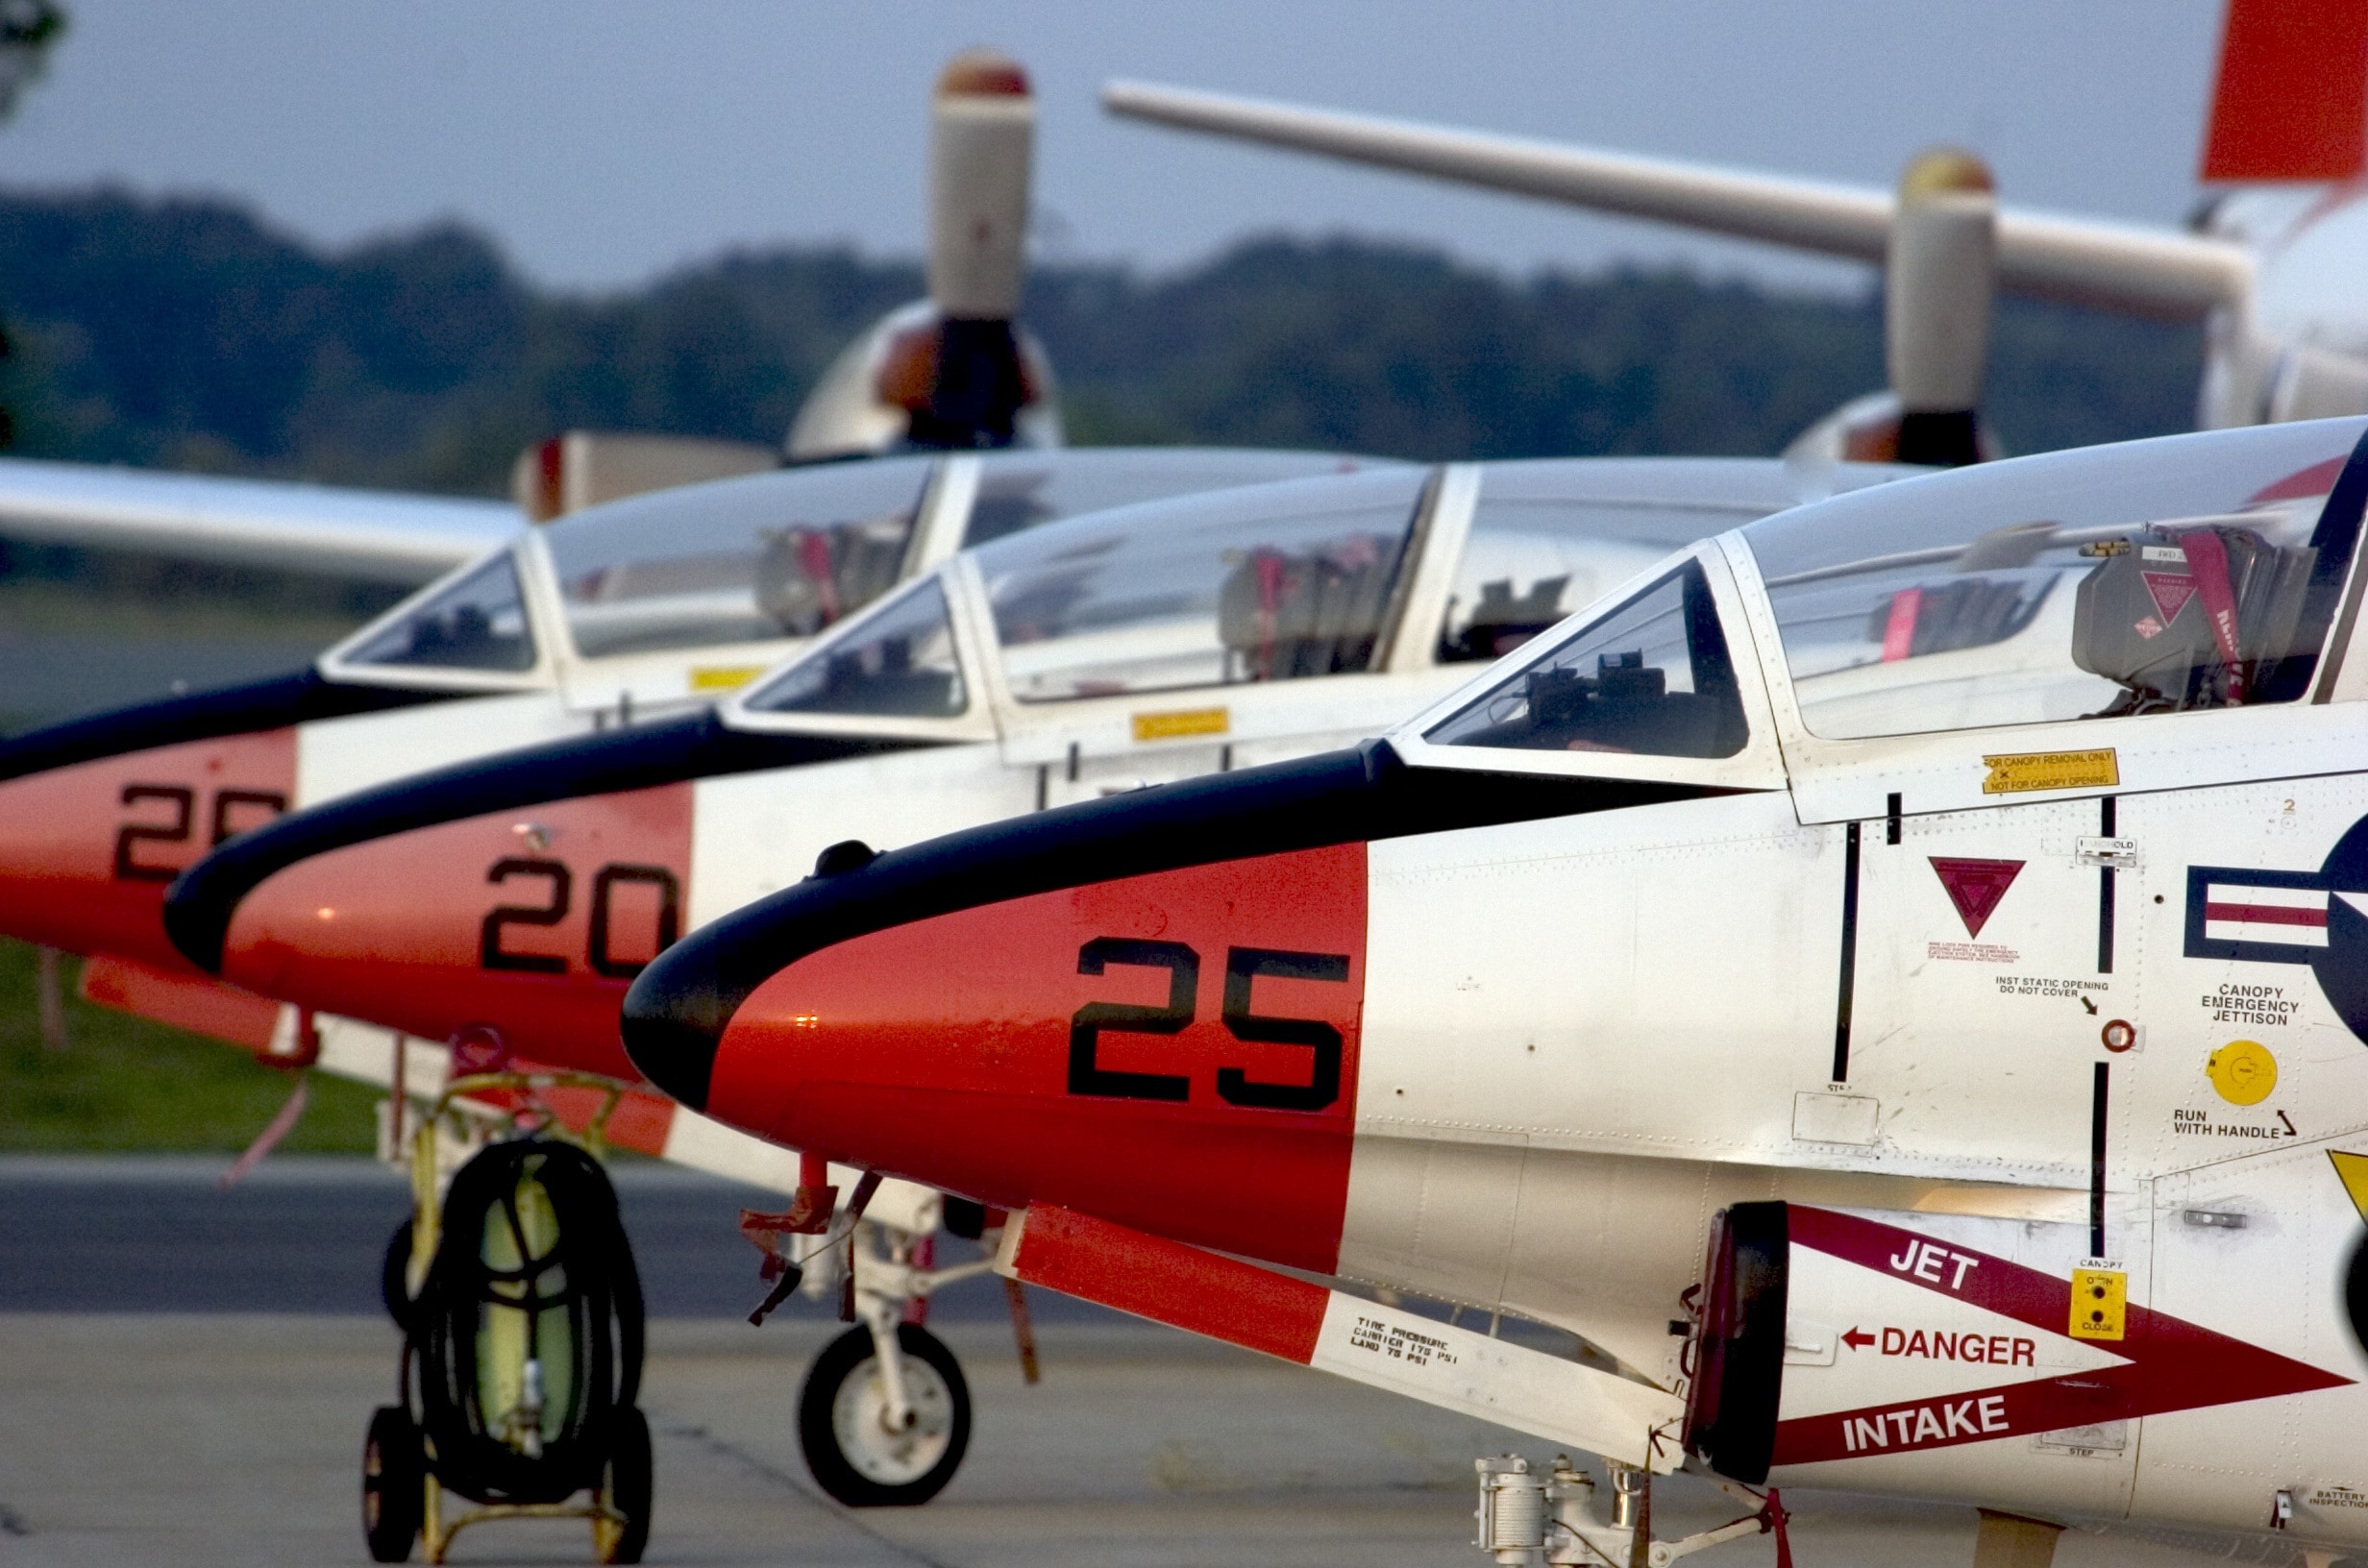 3 white and red jetplane